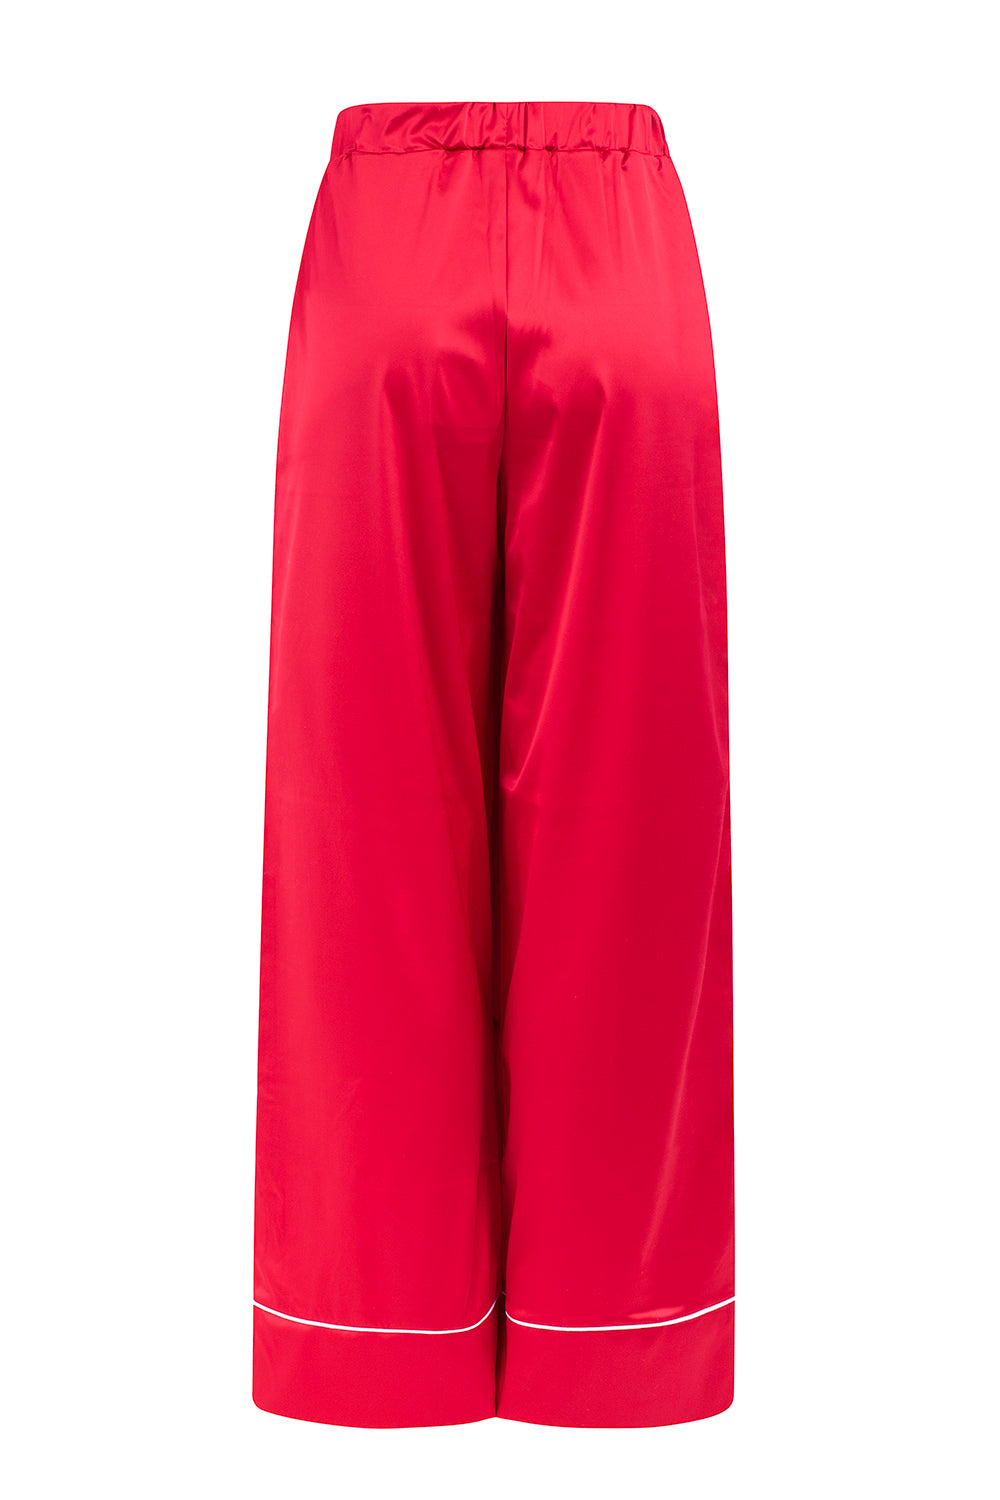 RED SATIN PJ TROUSERS